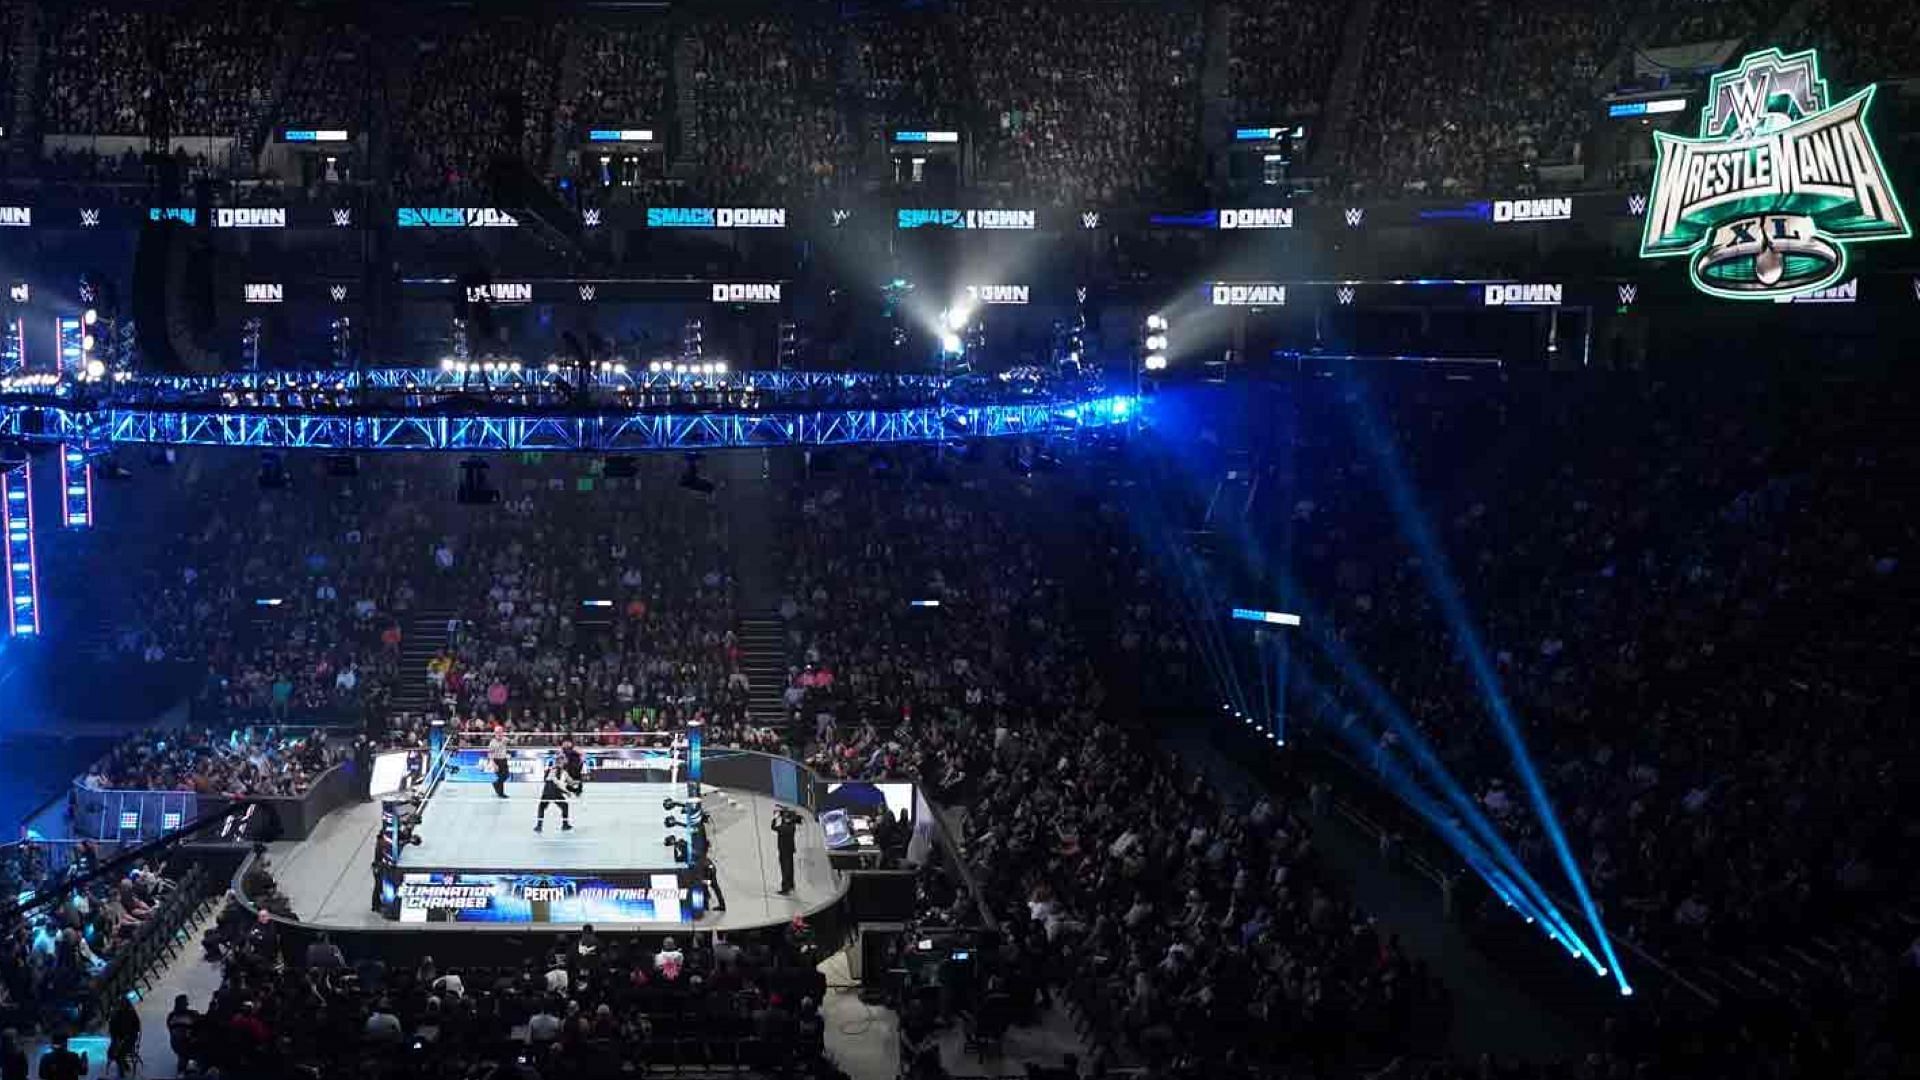 The WWE Universe packs the arena for a live SmackDown